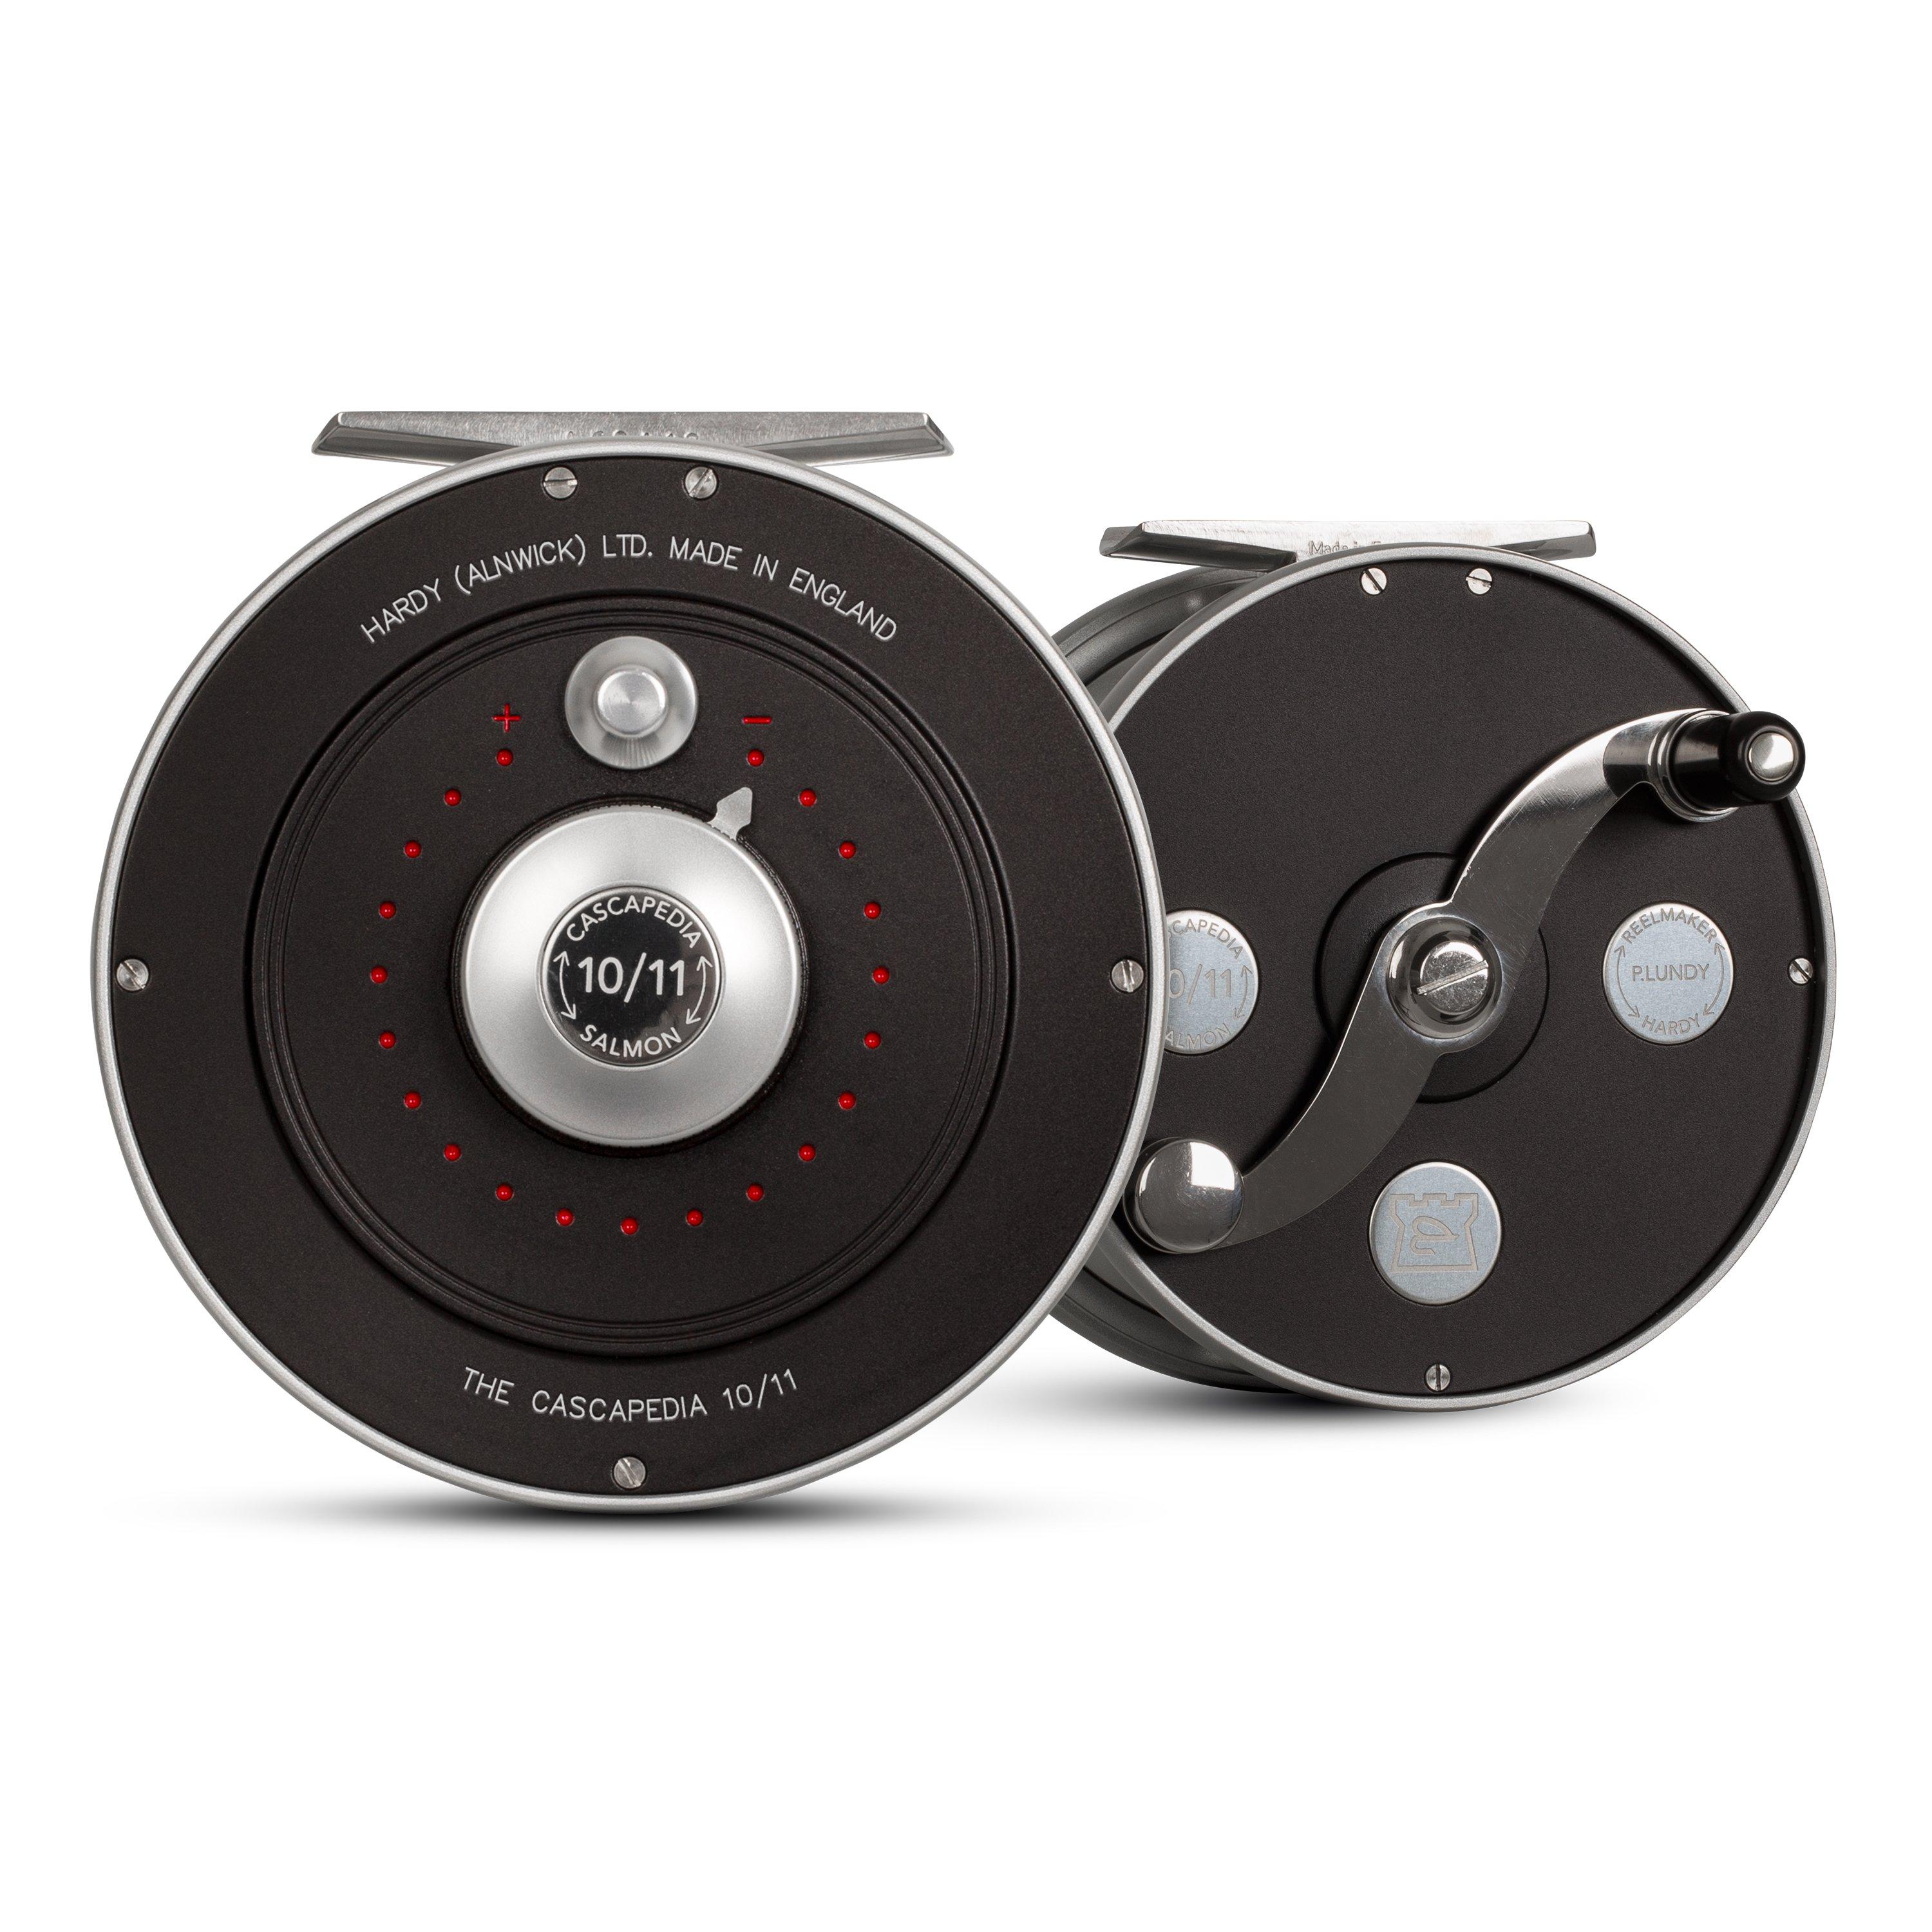 https://op1.0ps.us/original/opplanet-hardy-cascapedia-fly-reel-1-0-1-right-left-10-11-black-silver-hrecasb040-main